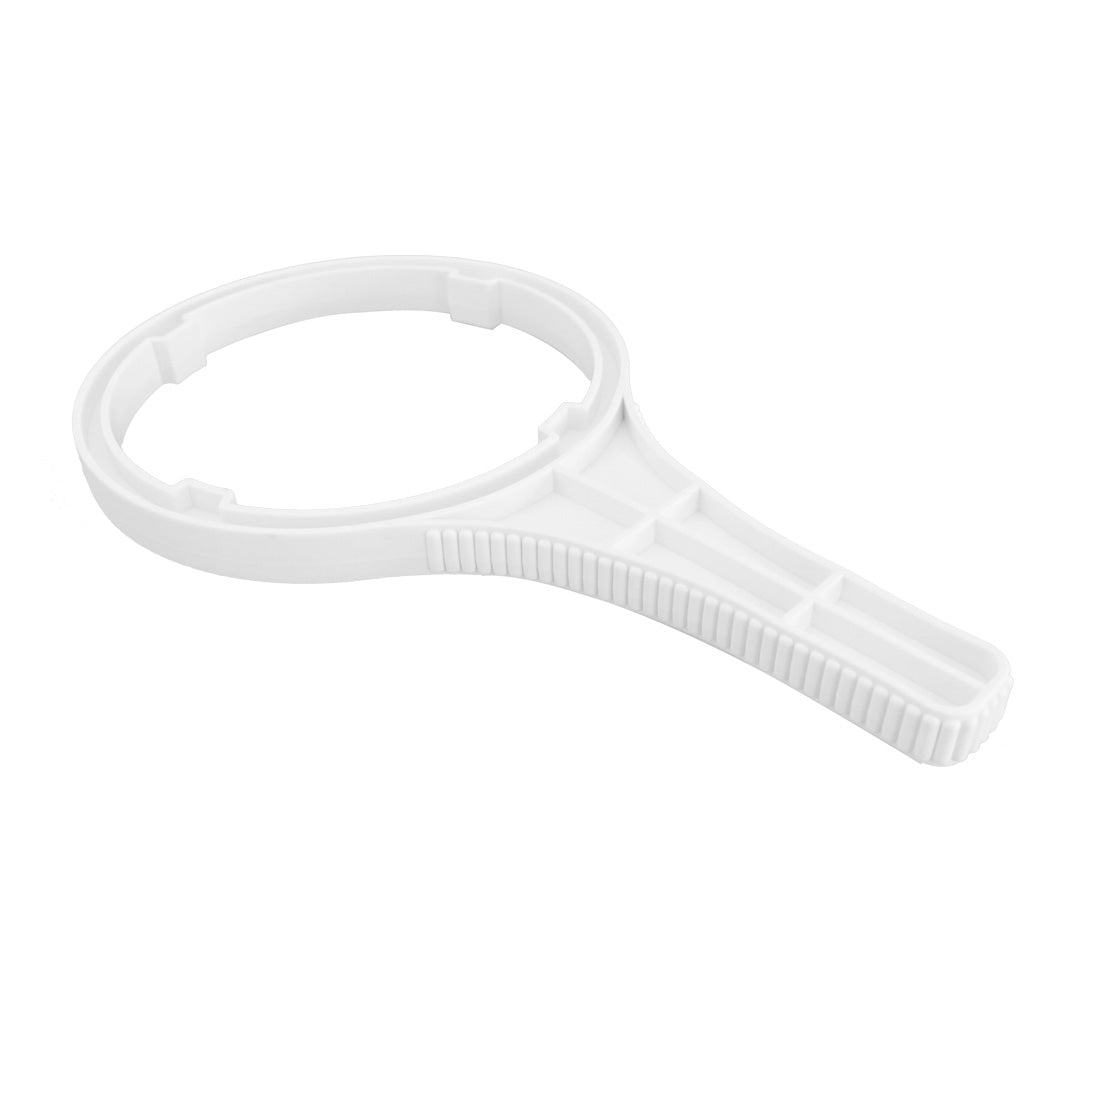 XERO Filter Wrench - Large Top View